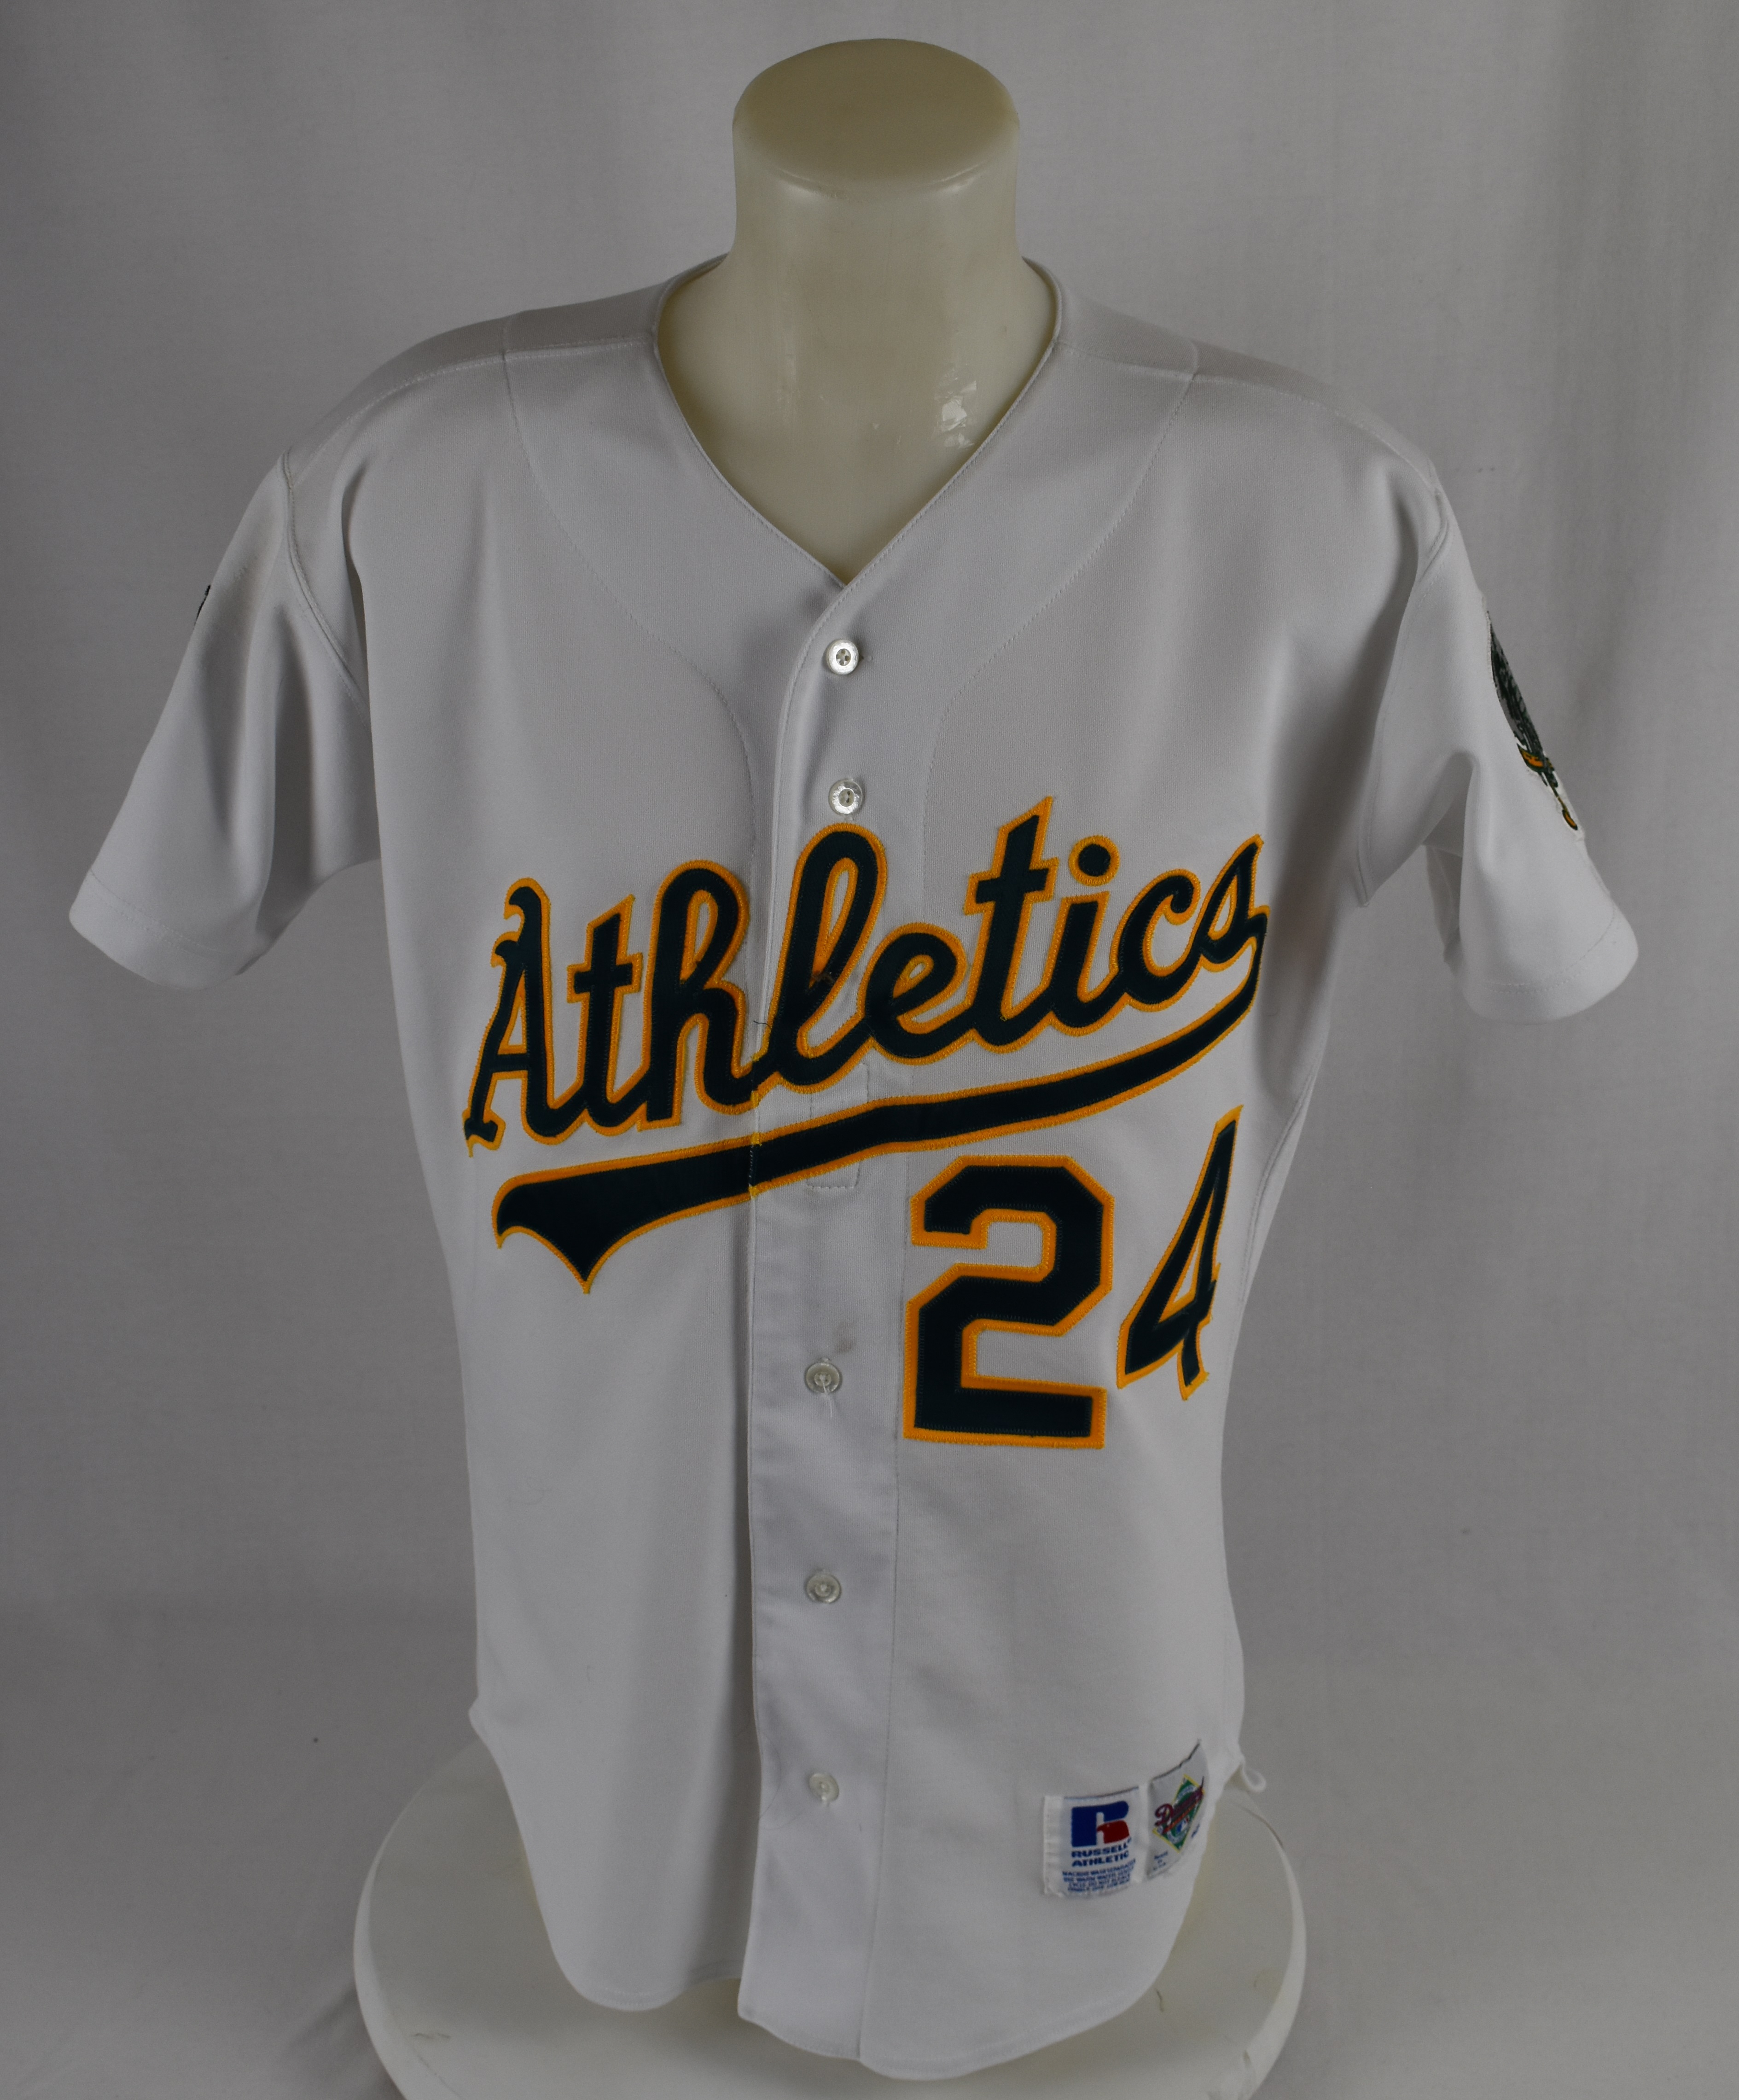 1994 Rickey Henderson Oakland Athletics A's Authentic Russell MLB